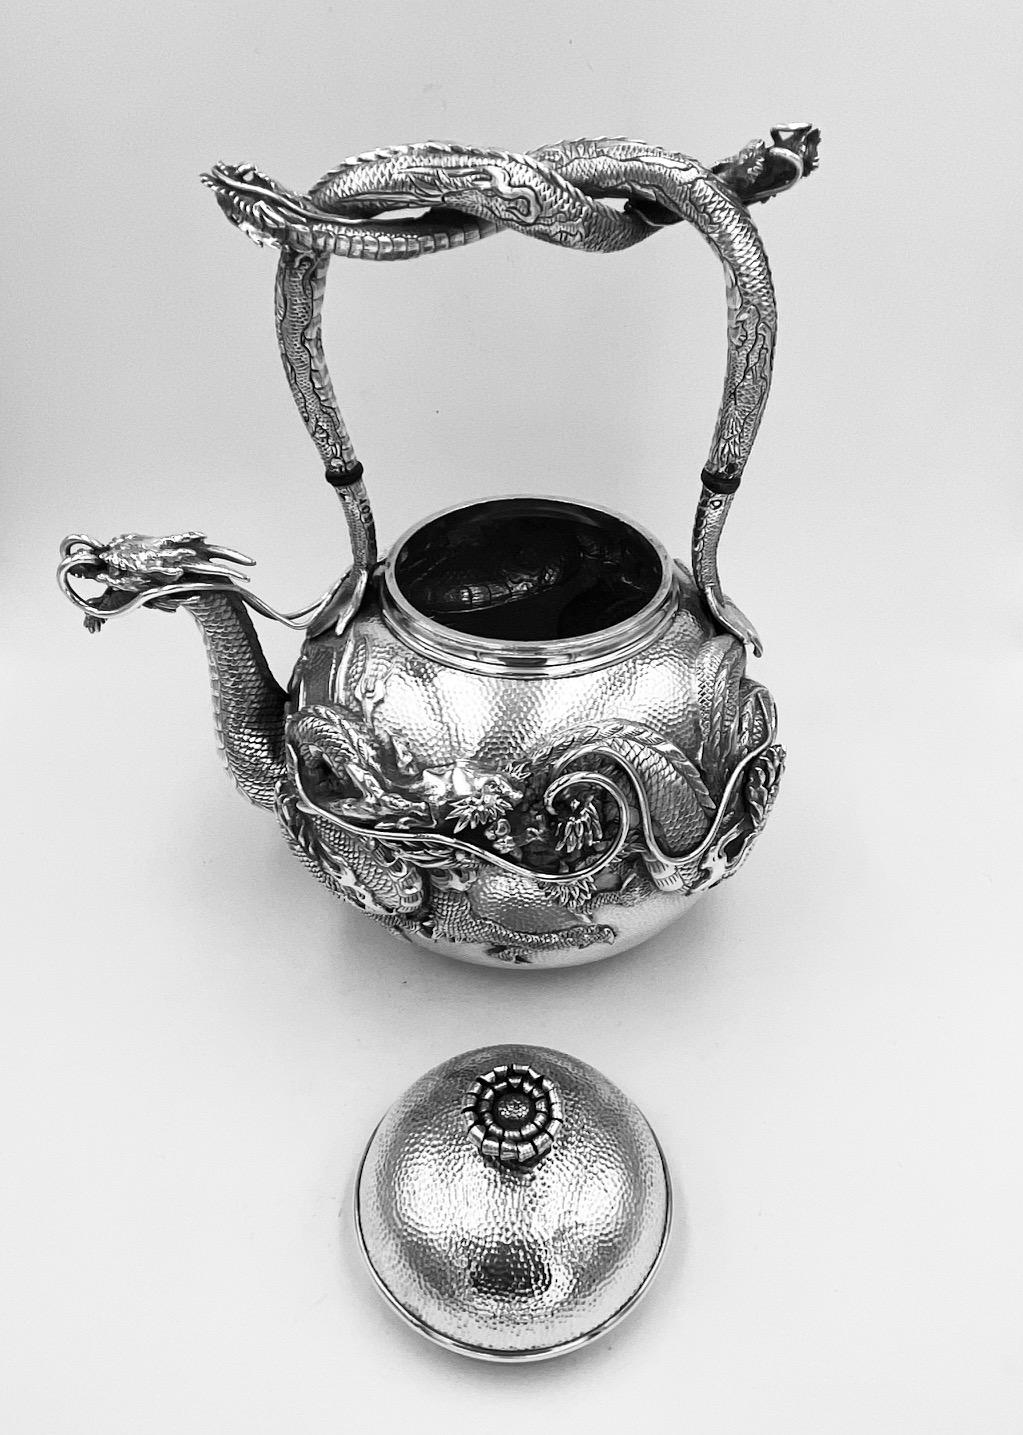 Japanese Silver Meijii Period Tea Kettle with Entwined Dragons Handle 3